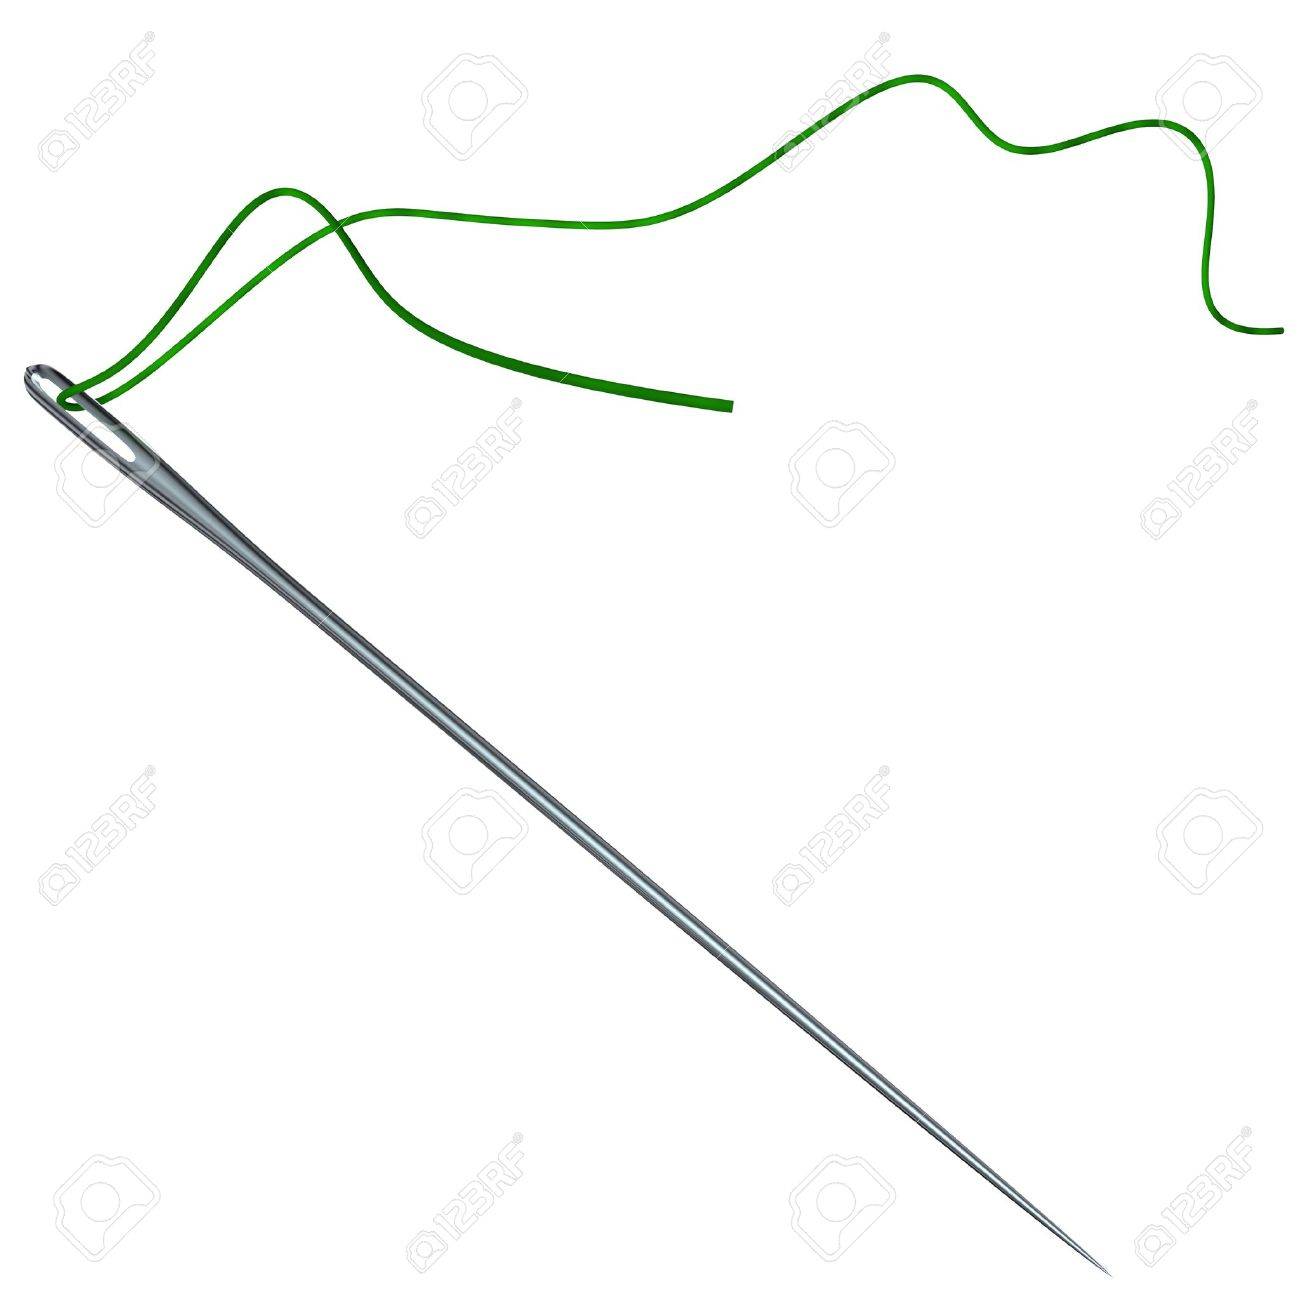 8889443-3d-rendered-needle-with-green-thread-Stock-Photo-sewing.jpg